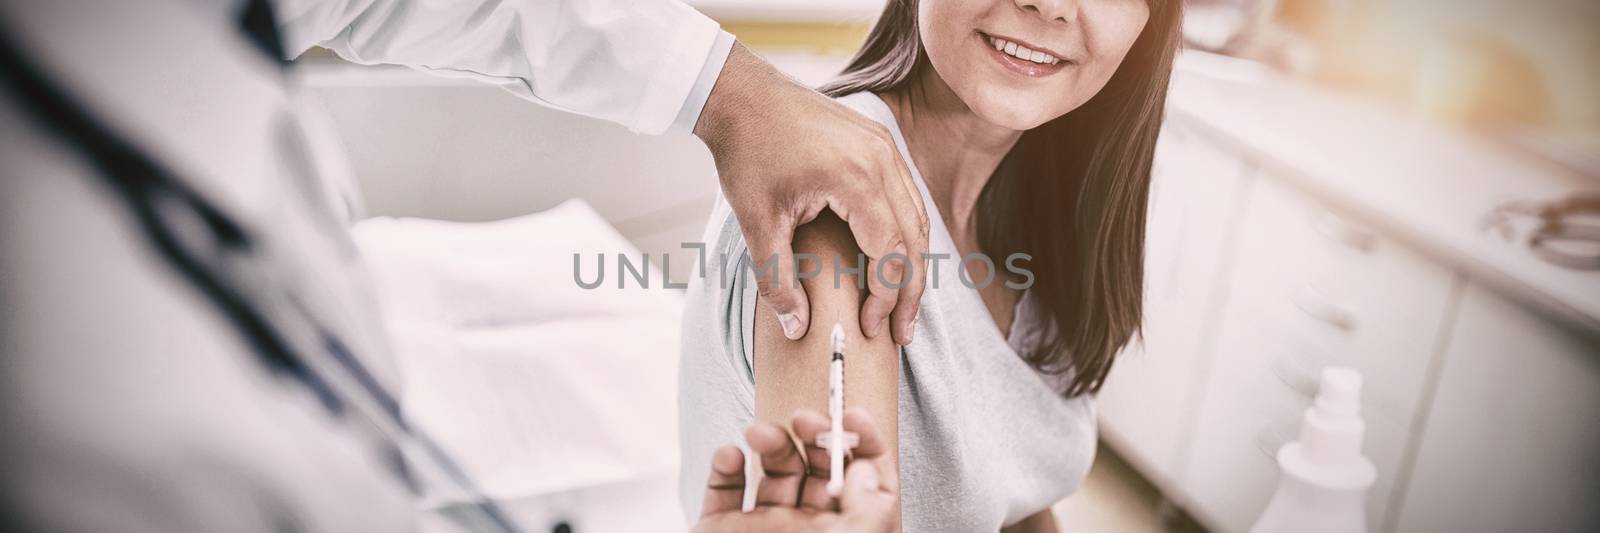 Doctor giving an injection to the patient at hospital